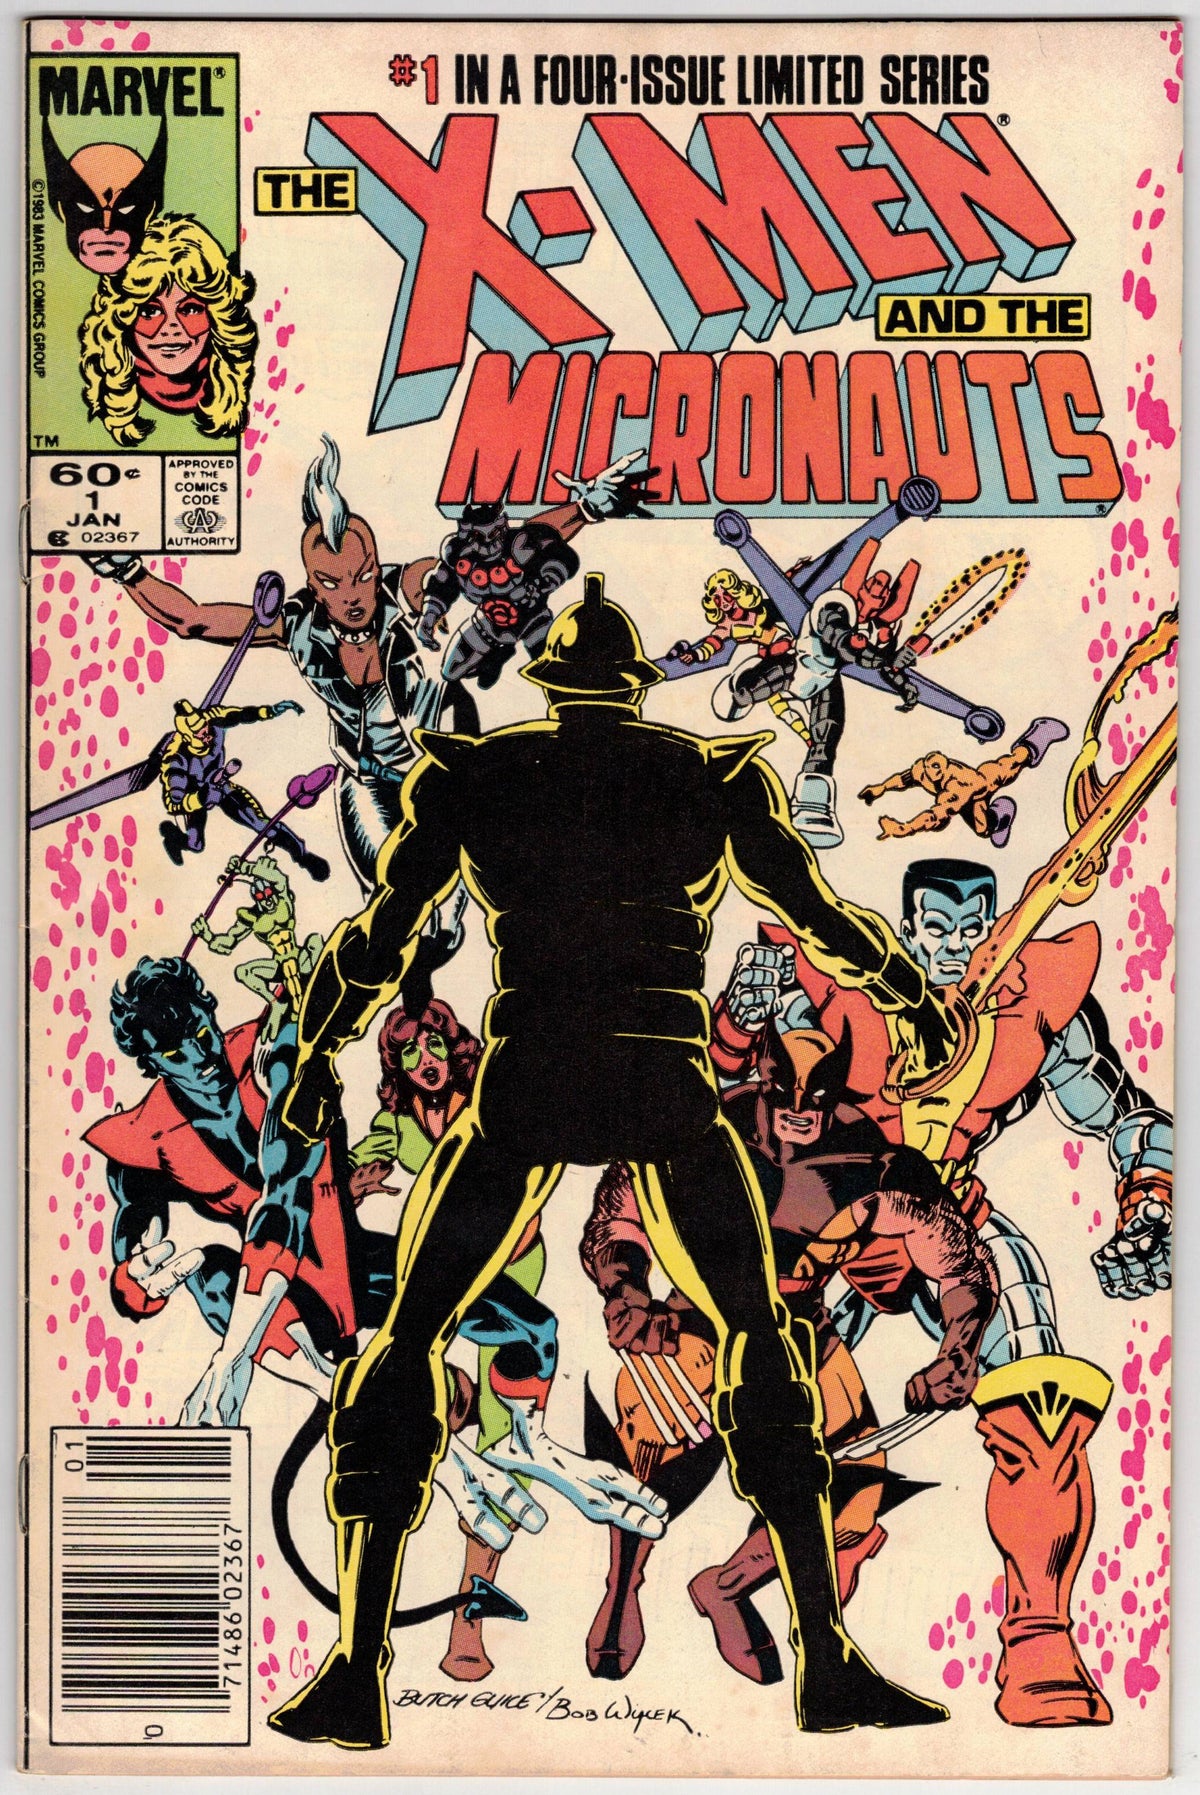 Photo of X-Men and the Micronauts (1983) Issue 1 - Fine Comic sold by Stronghold Collectibles